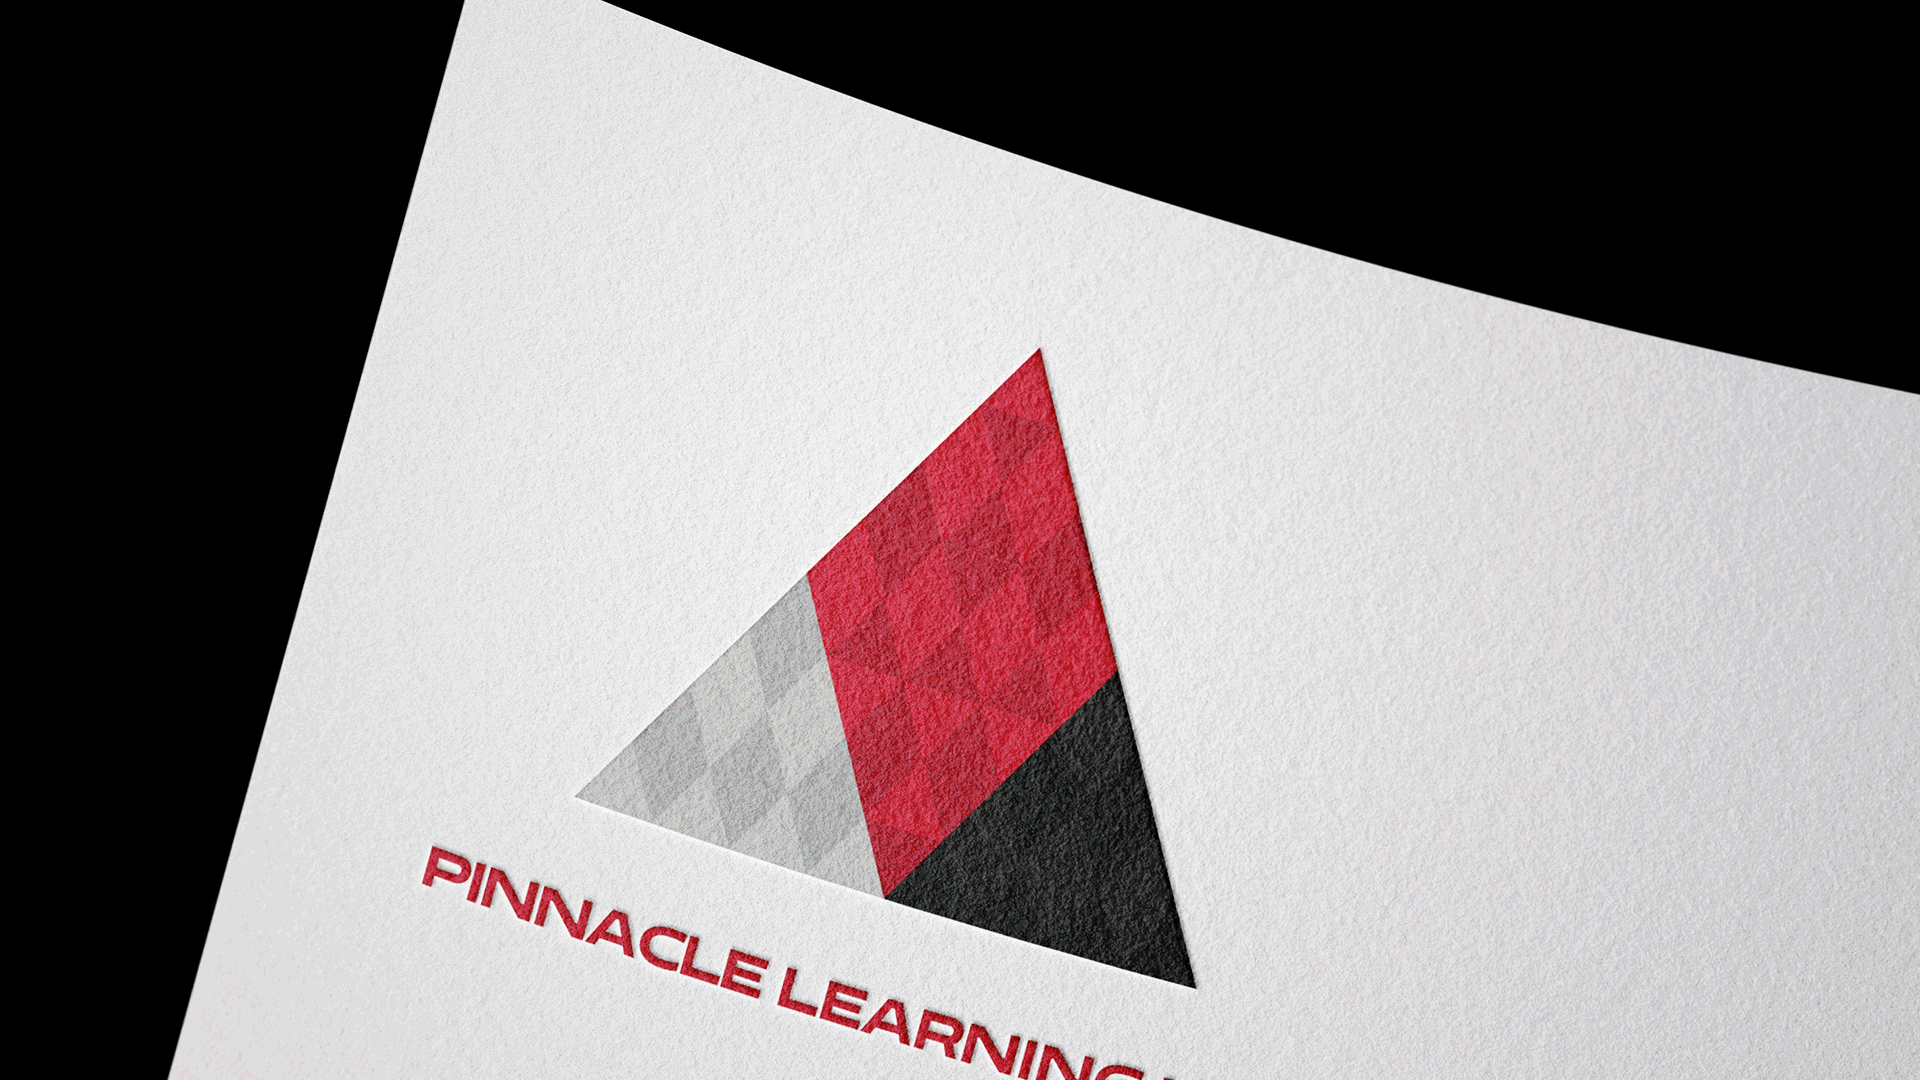 Various elements from the Capstone People & Pinnacle Learning branding project.